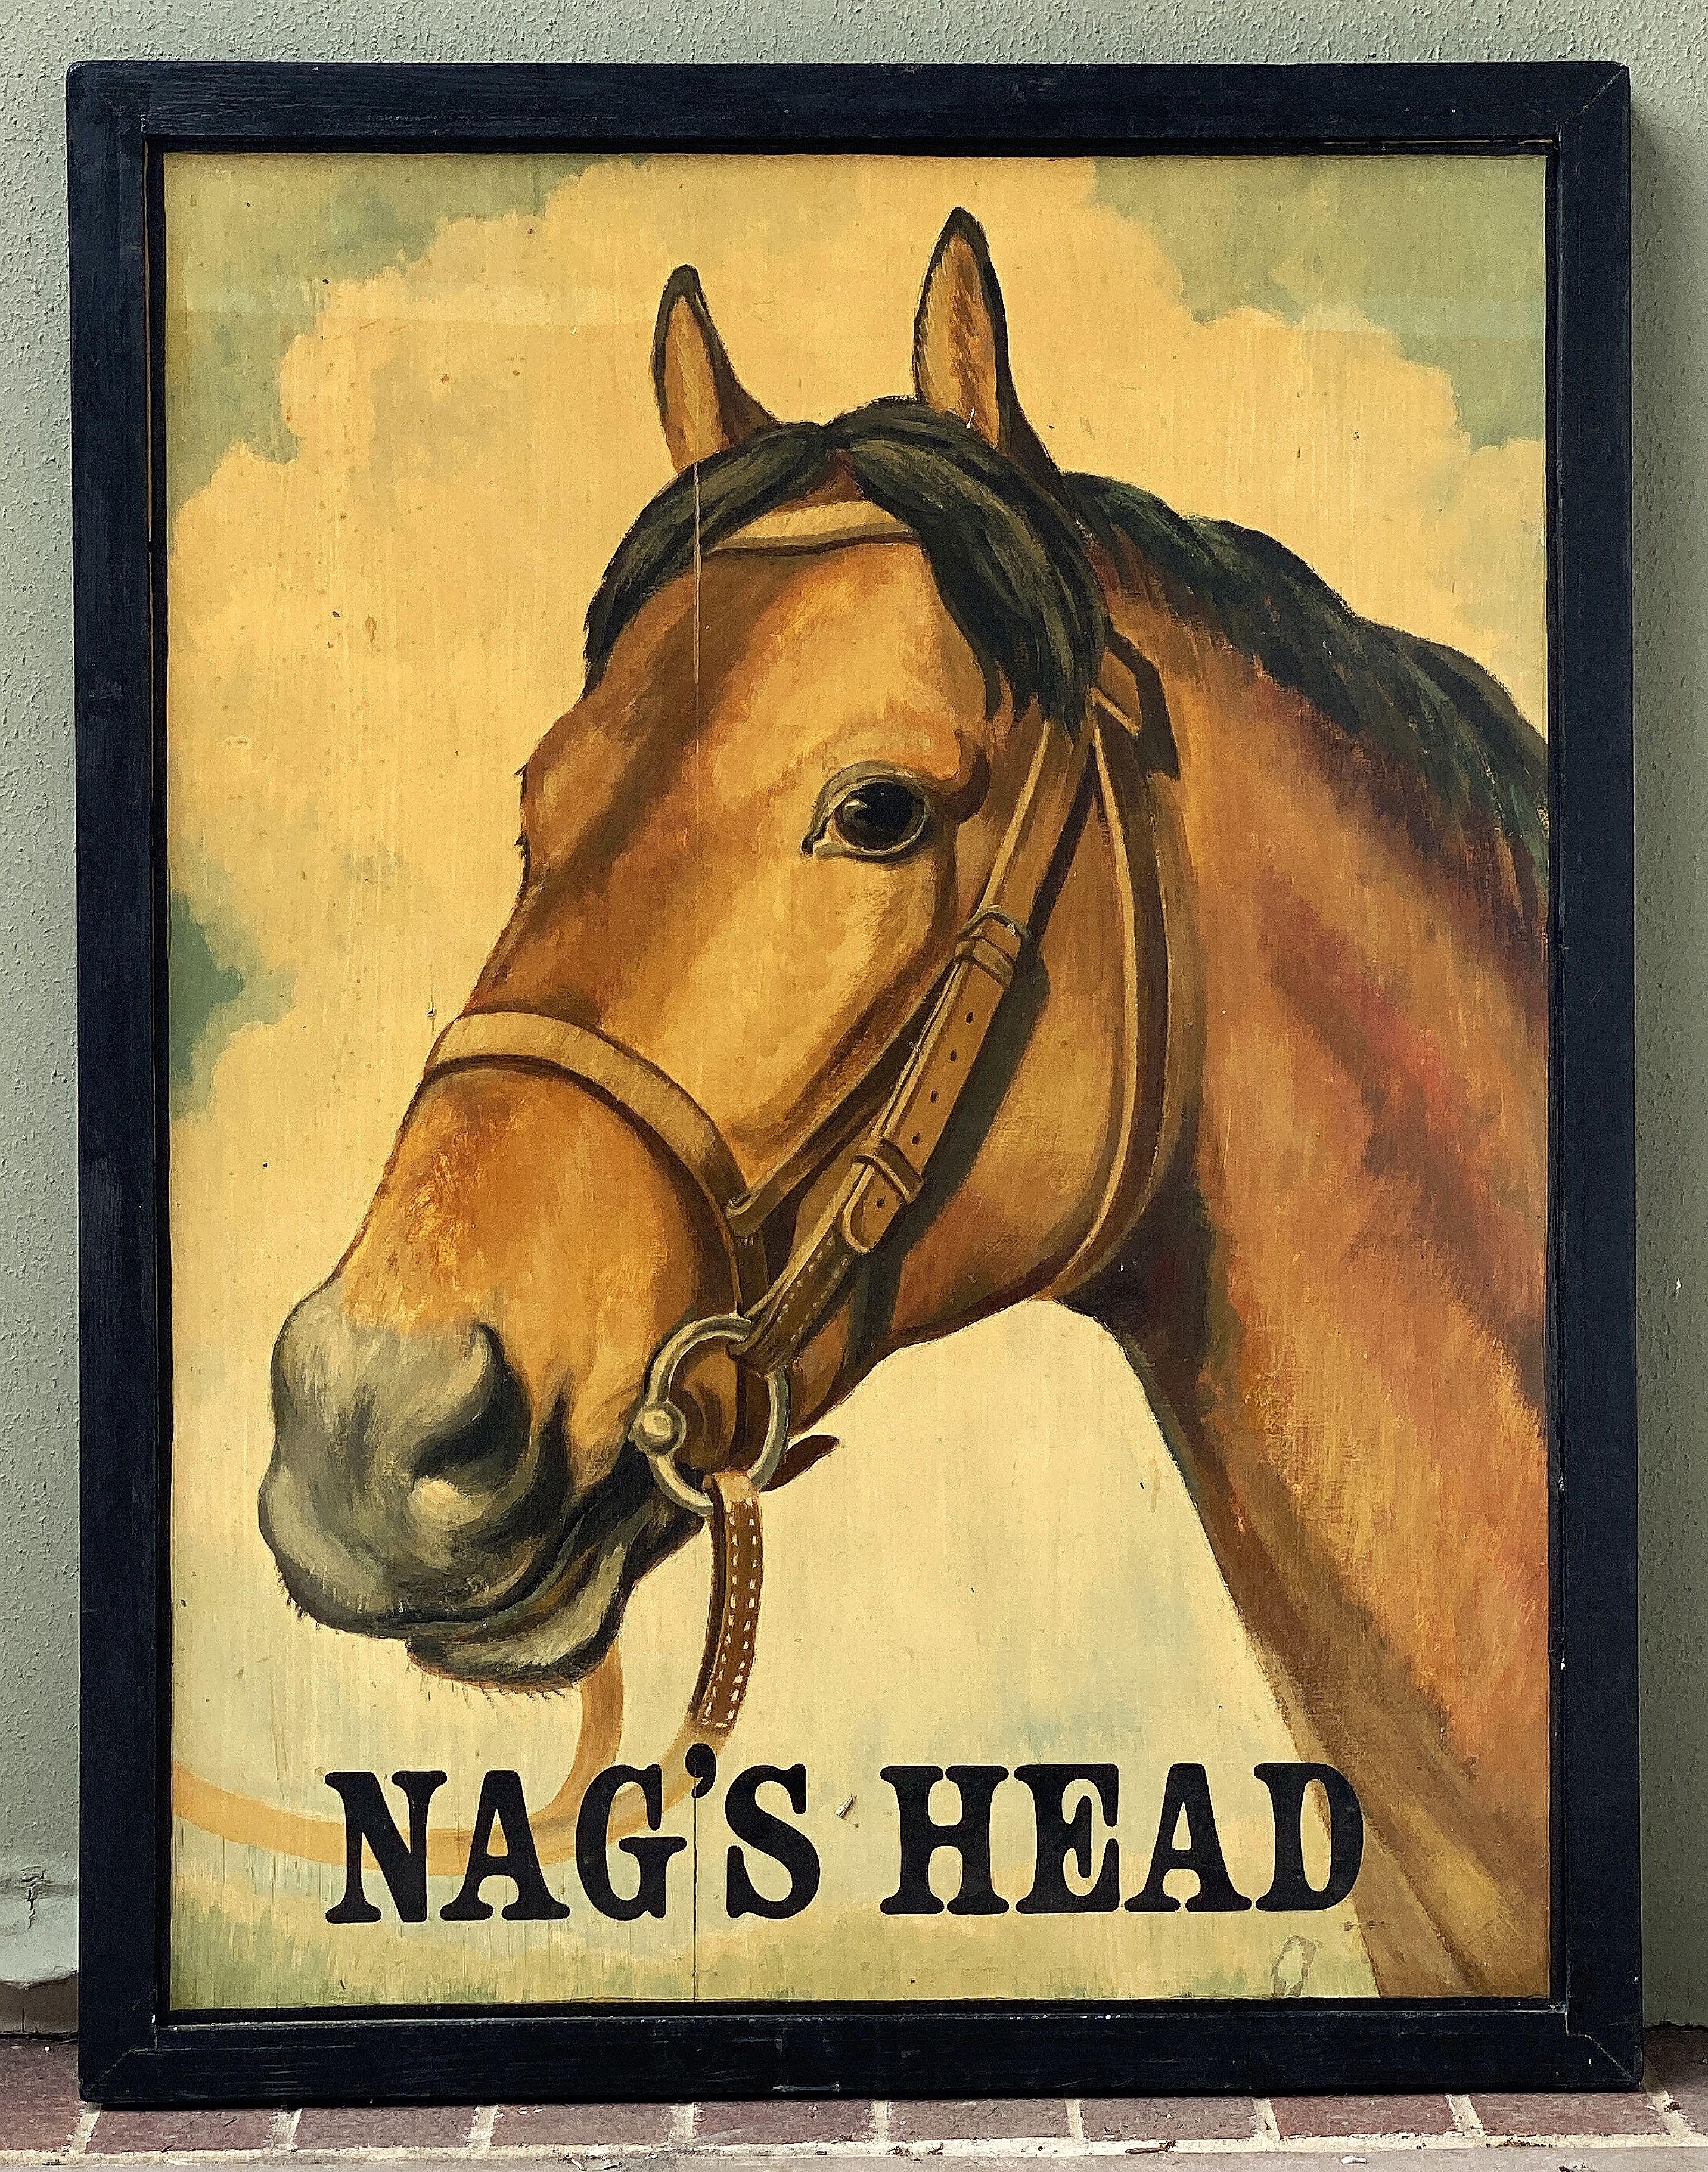 An authentic English pub sign (one-sided) featuring a painting of a horse's head in a bridle entitled: Nag's Head.

A very fine example of vintage advertising artwork, ready for display.